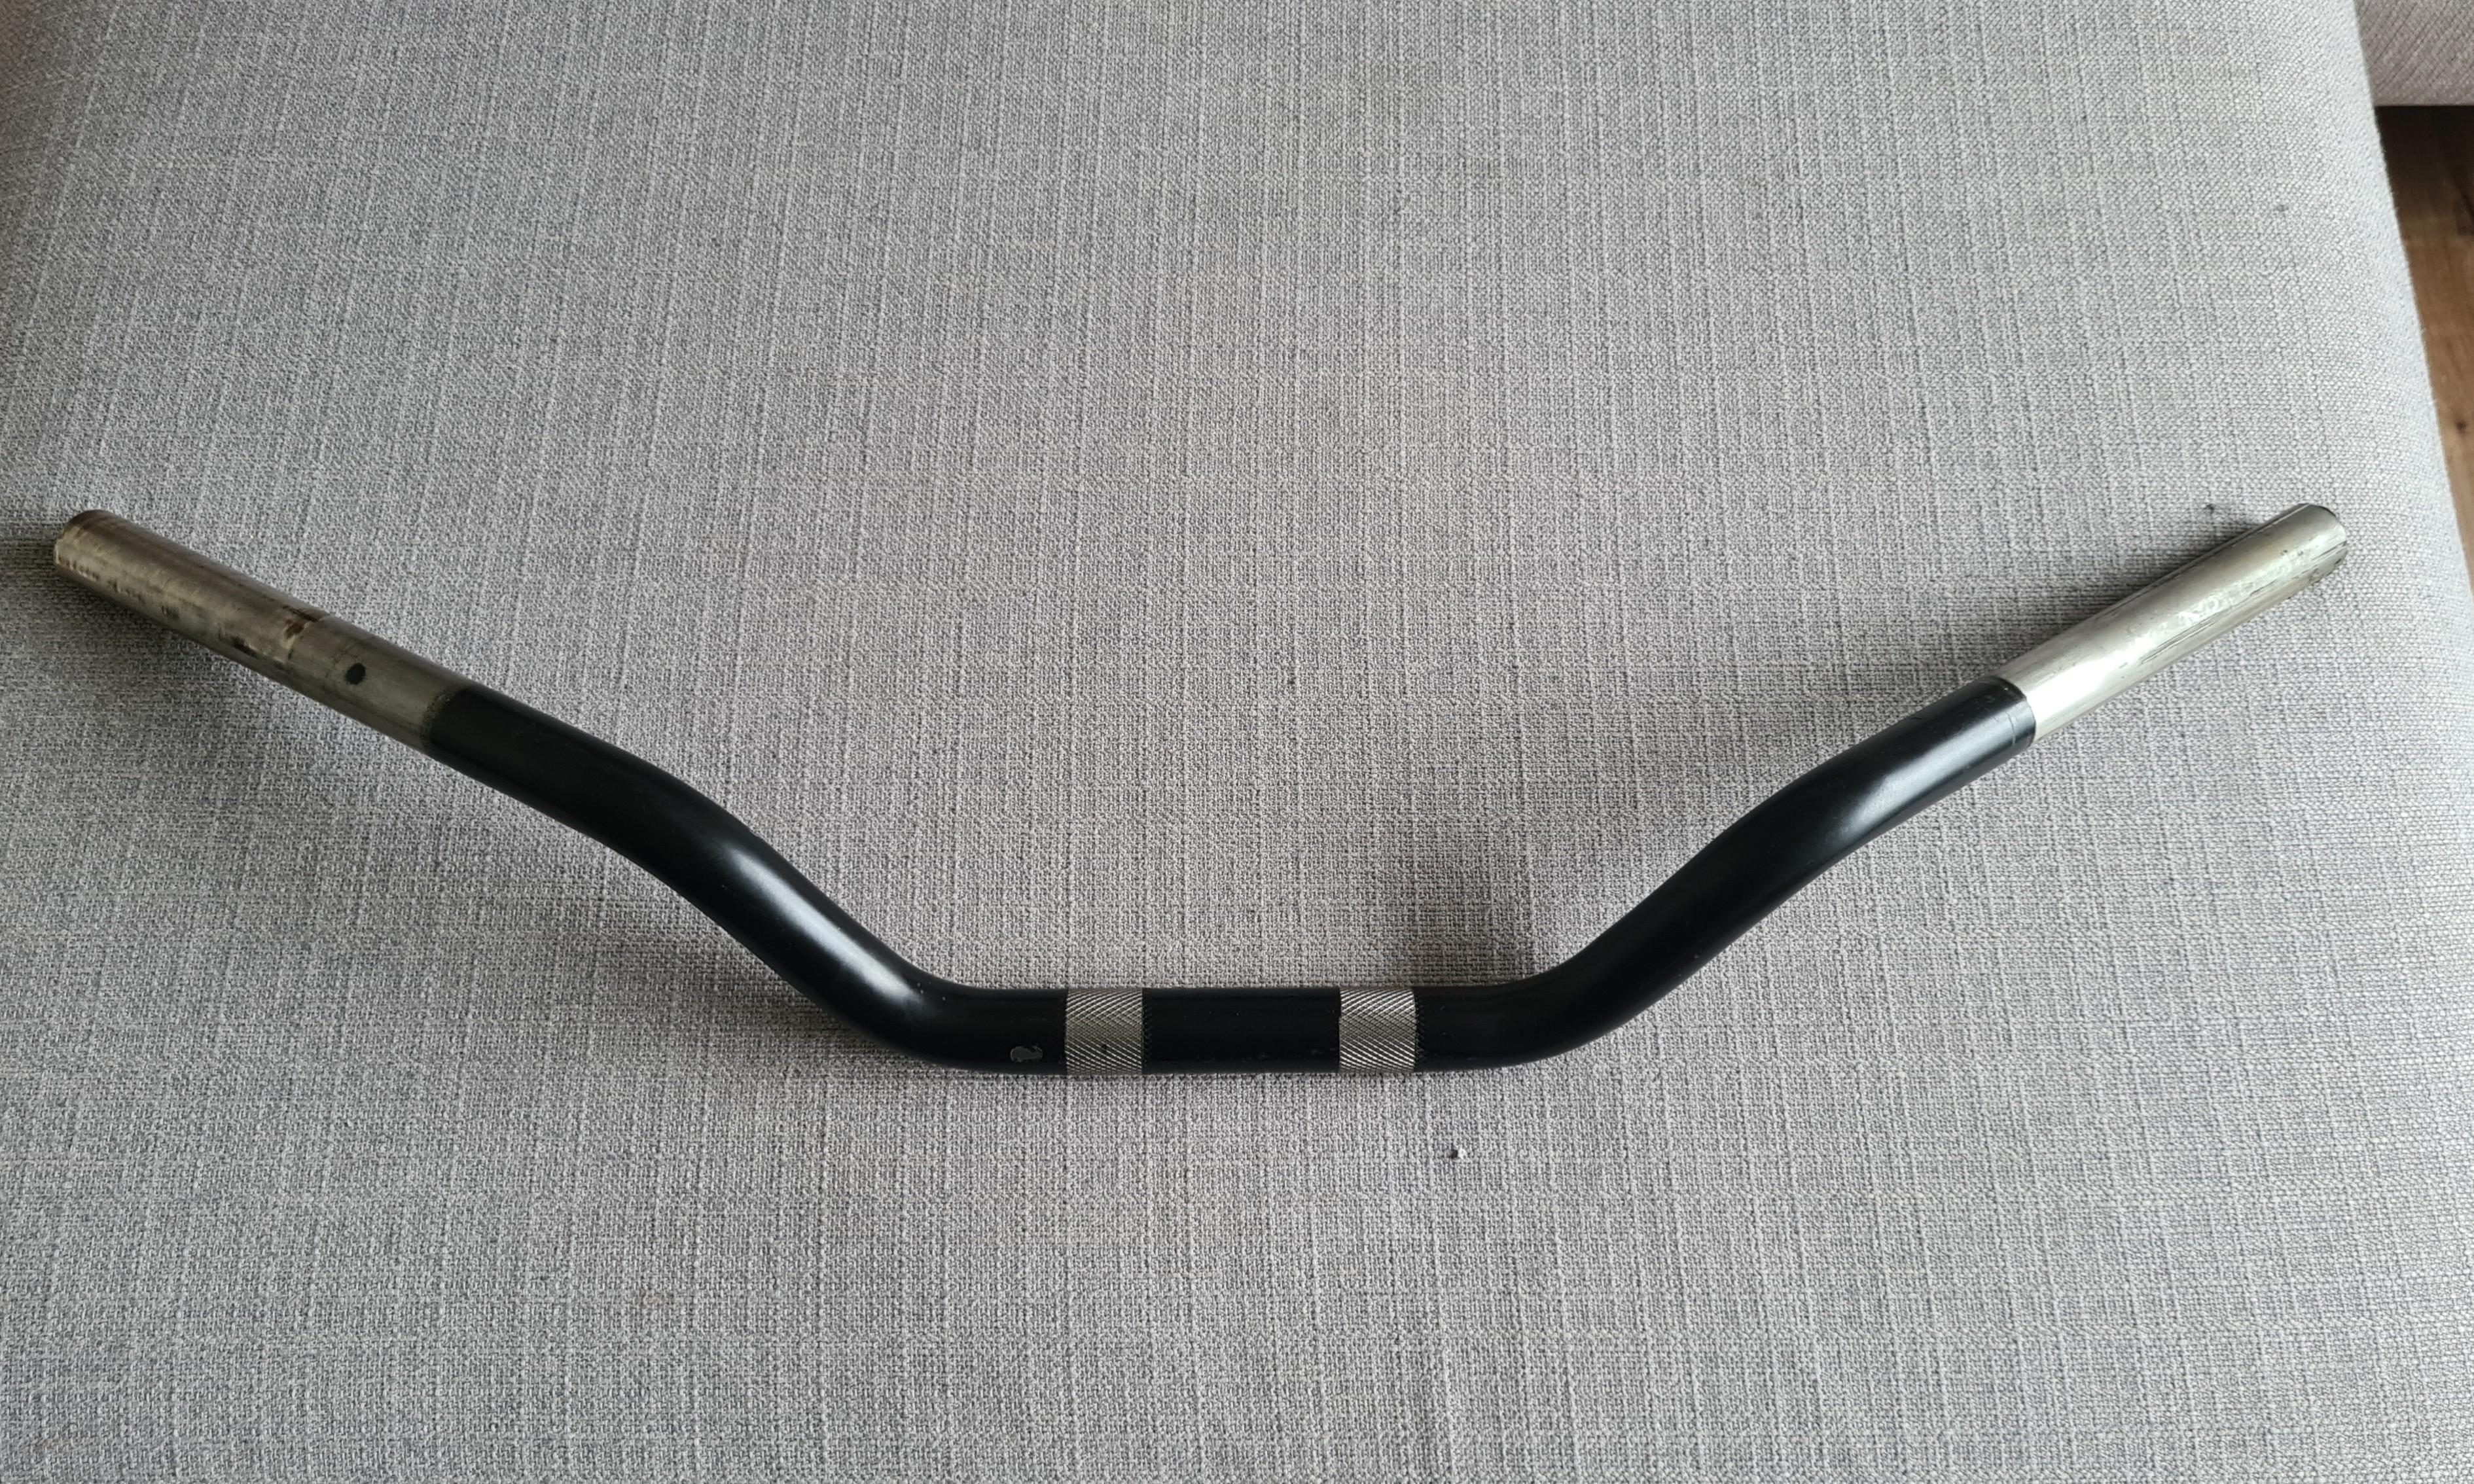 Harley Davidson Stock Handlebar Motorcycles Motorcycle Accessories On Carousell